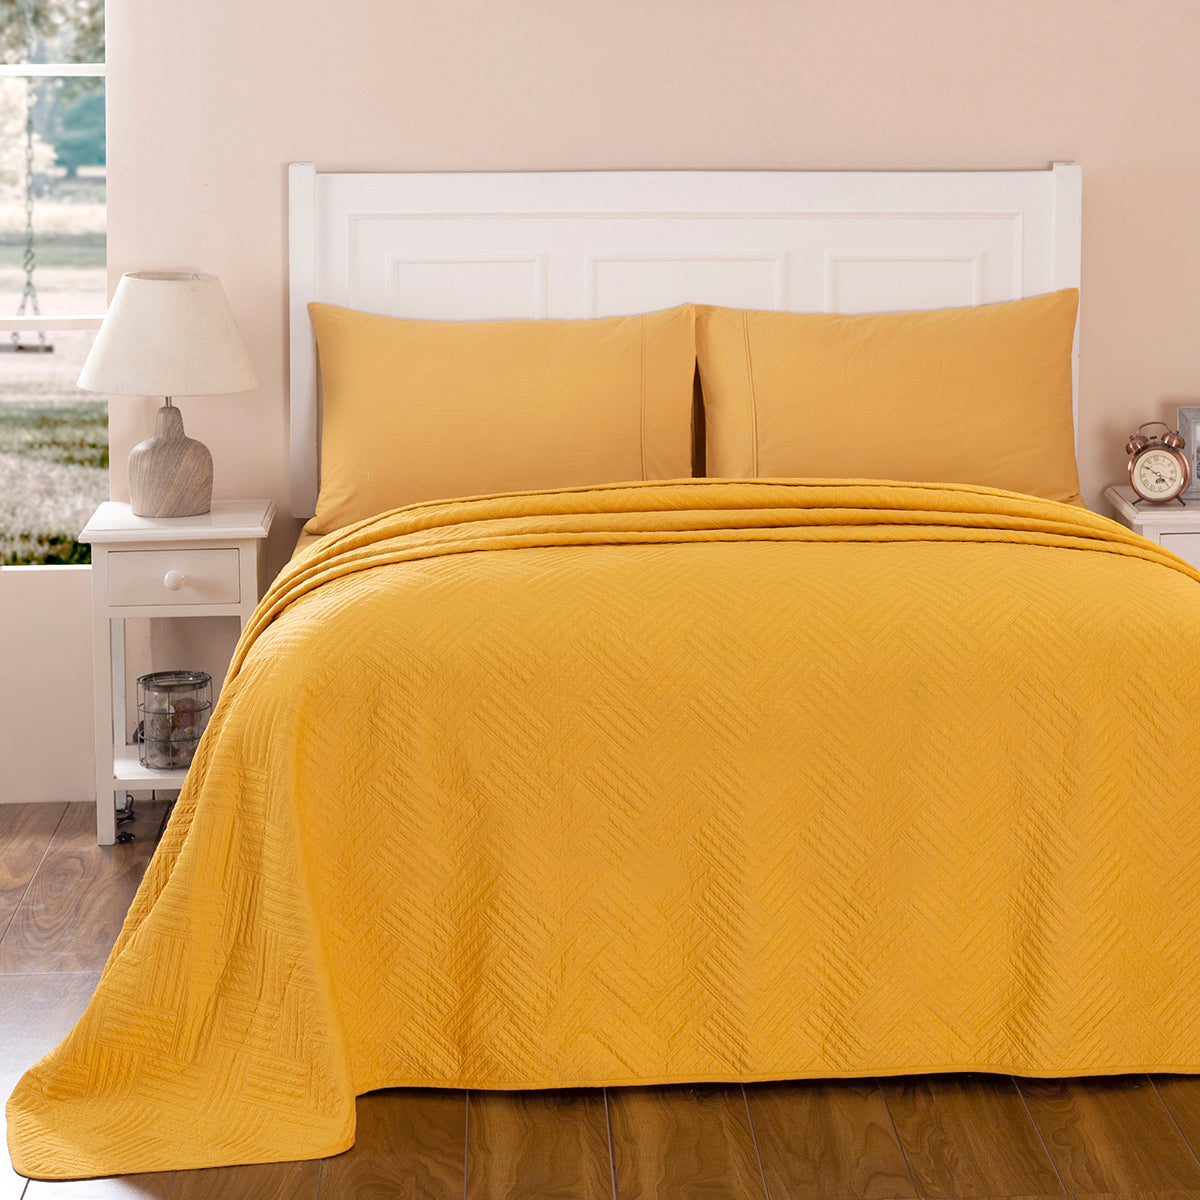 Eliott Summer AC Quilt/Quilted Bed Cover/Comforter Mustard